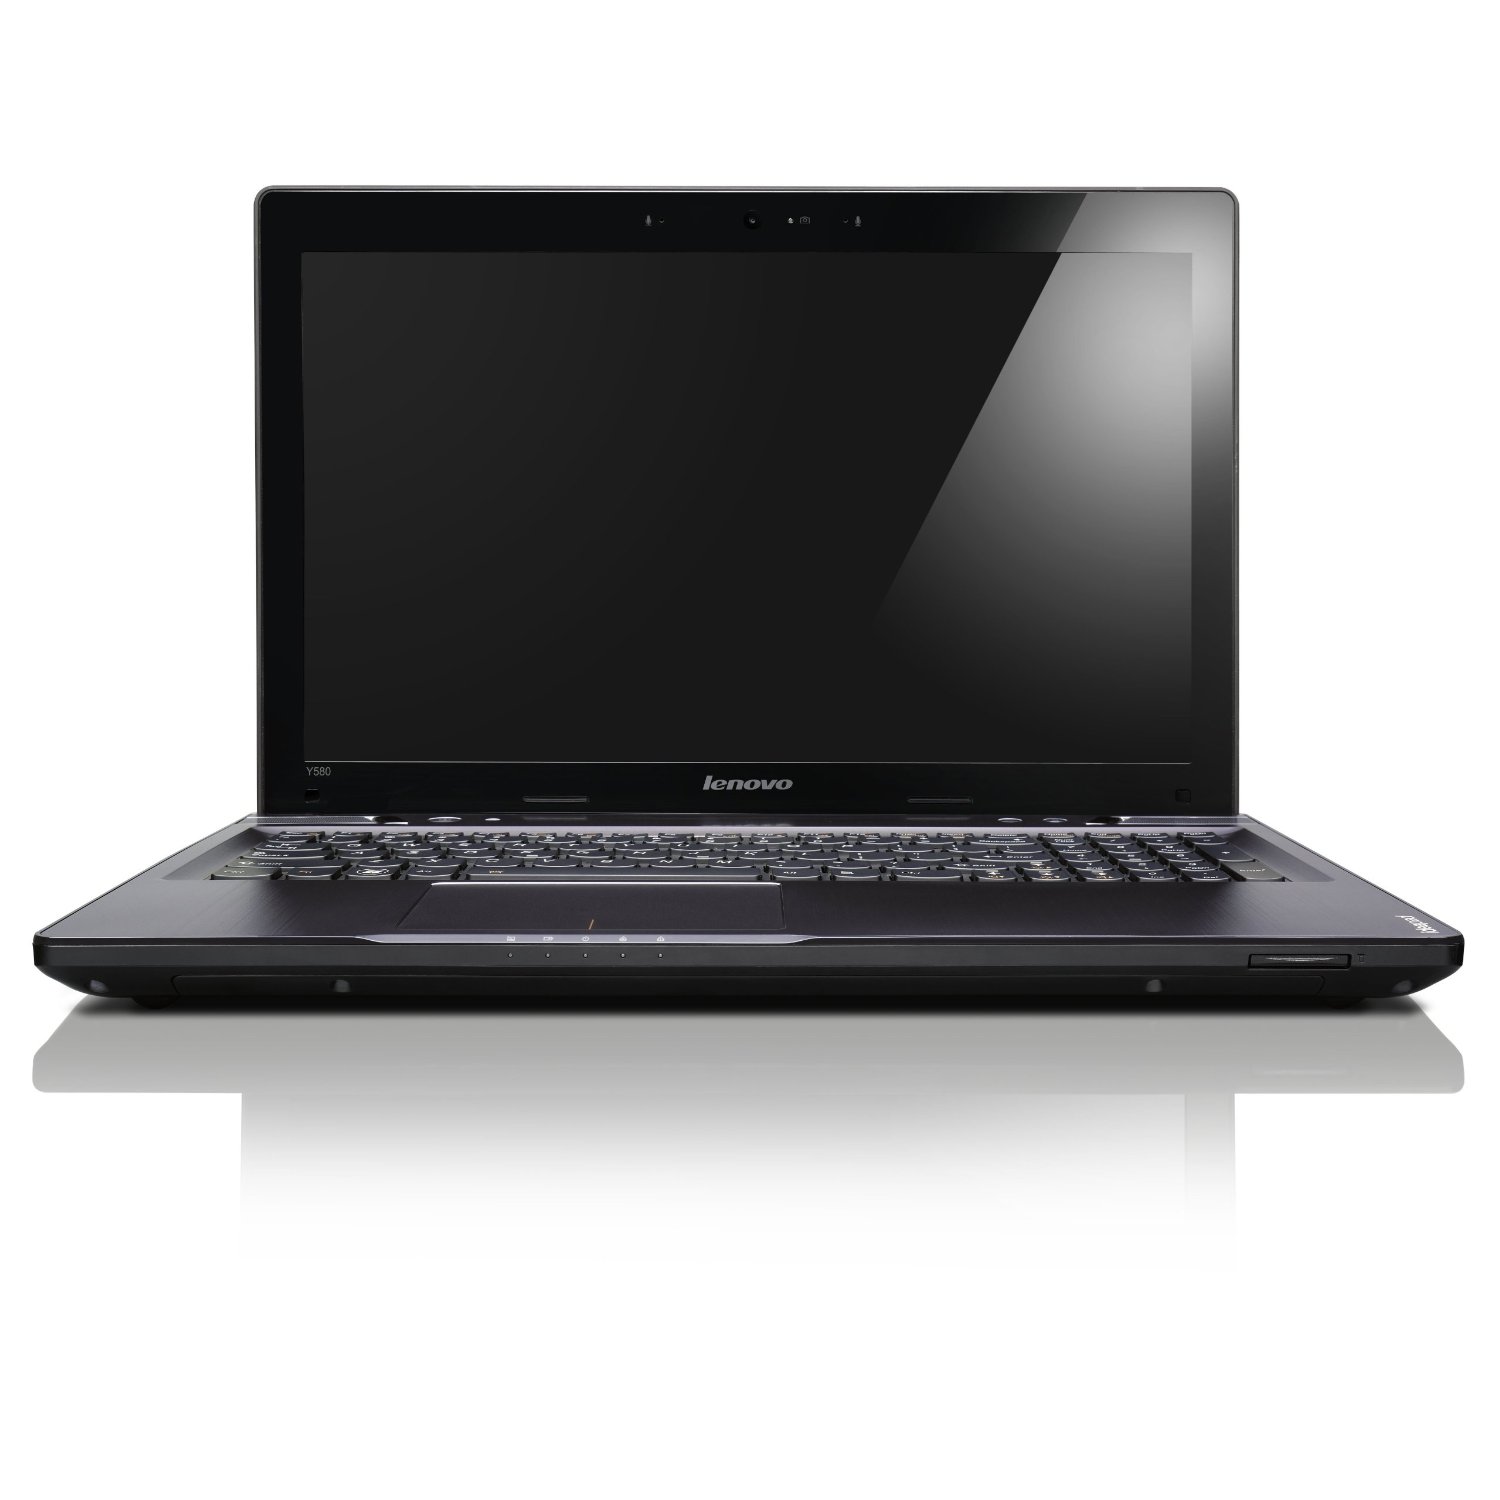 http://thetechjournal.com/wp-content/uploads/images/1209/1346654145-lenovos-bulky-ideapad-y580-156inch-laptop-1.jpg